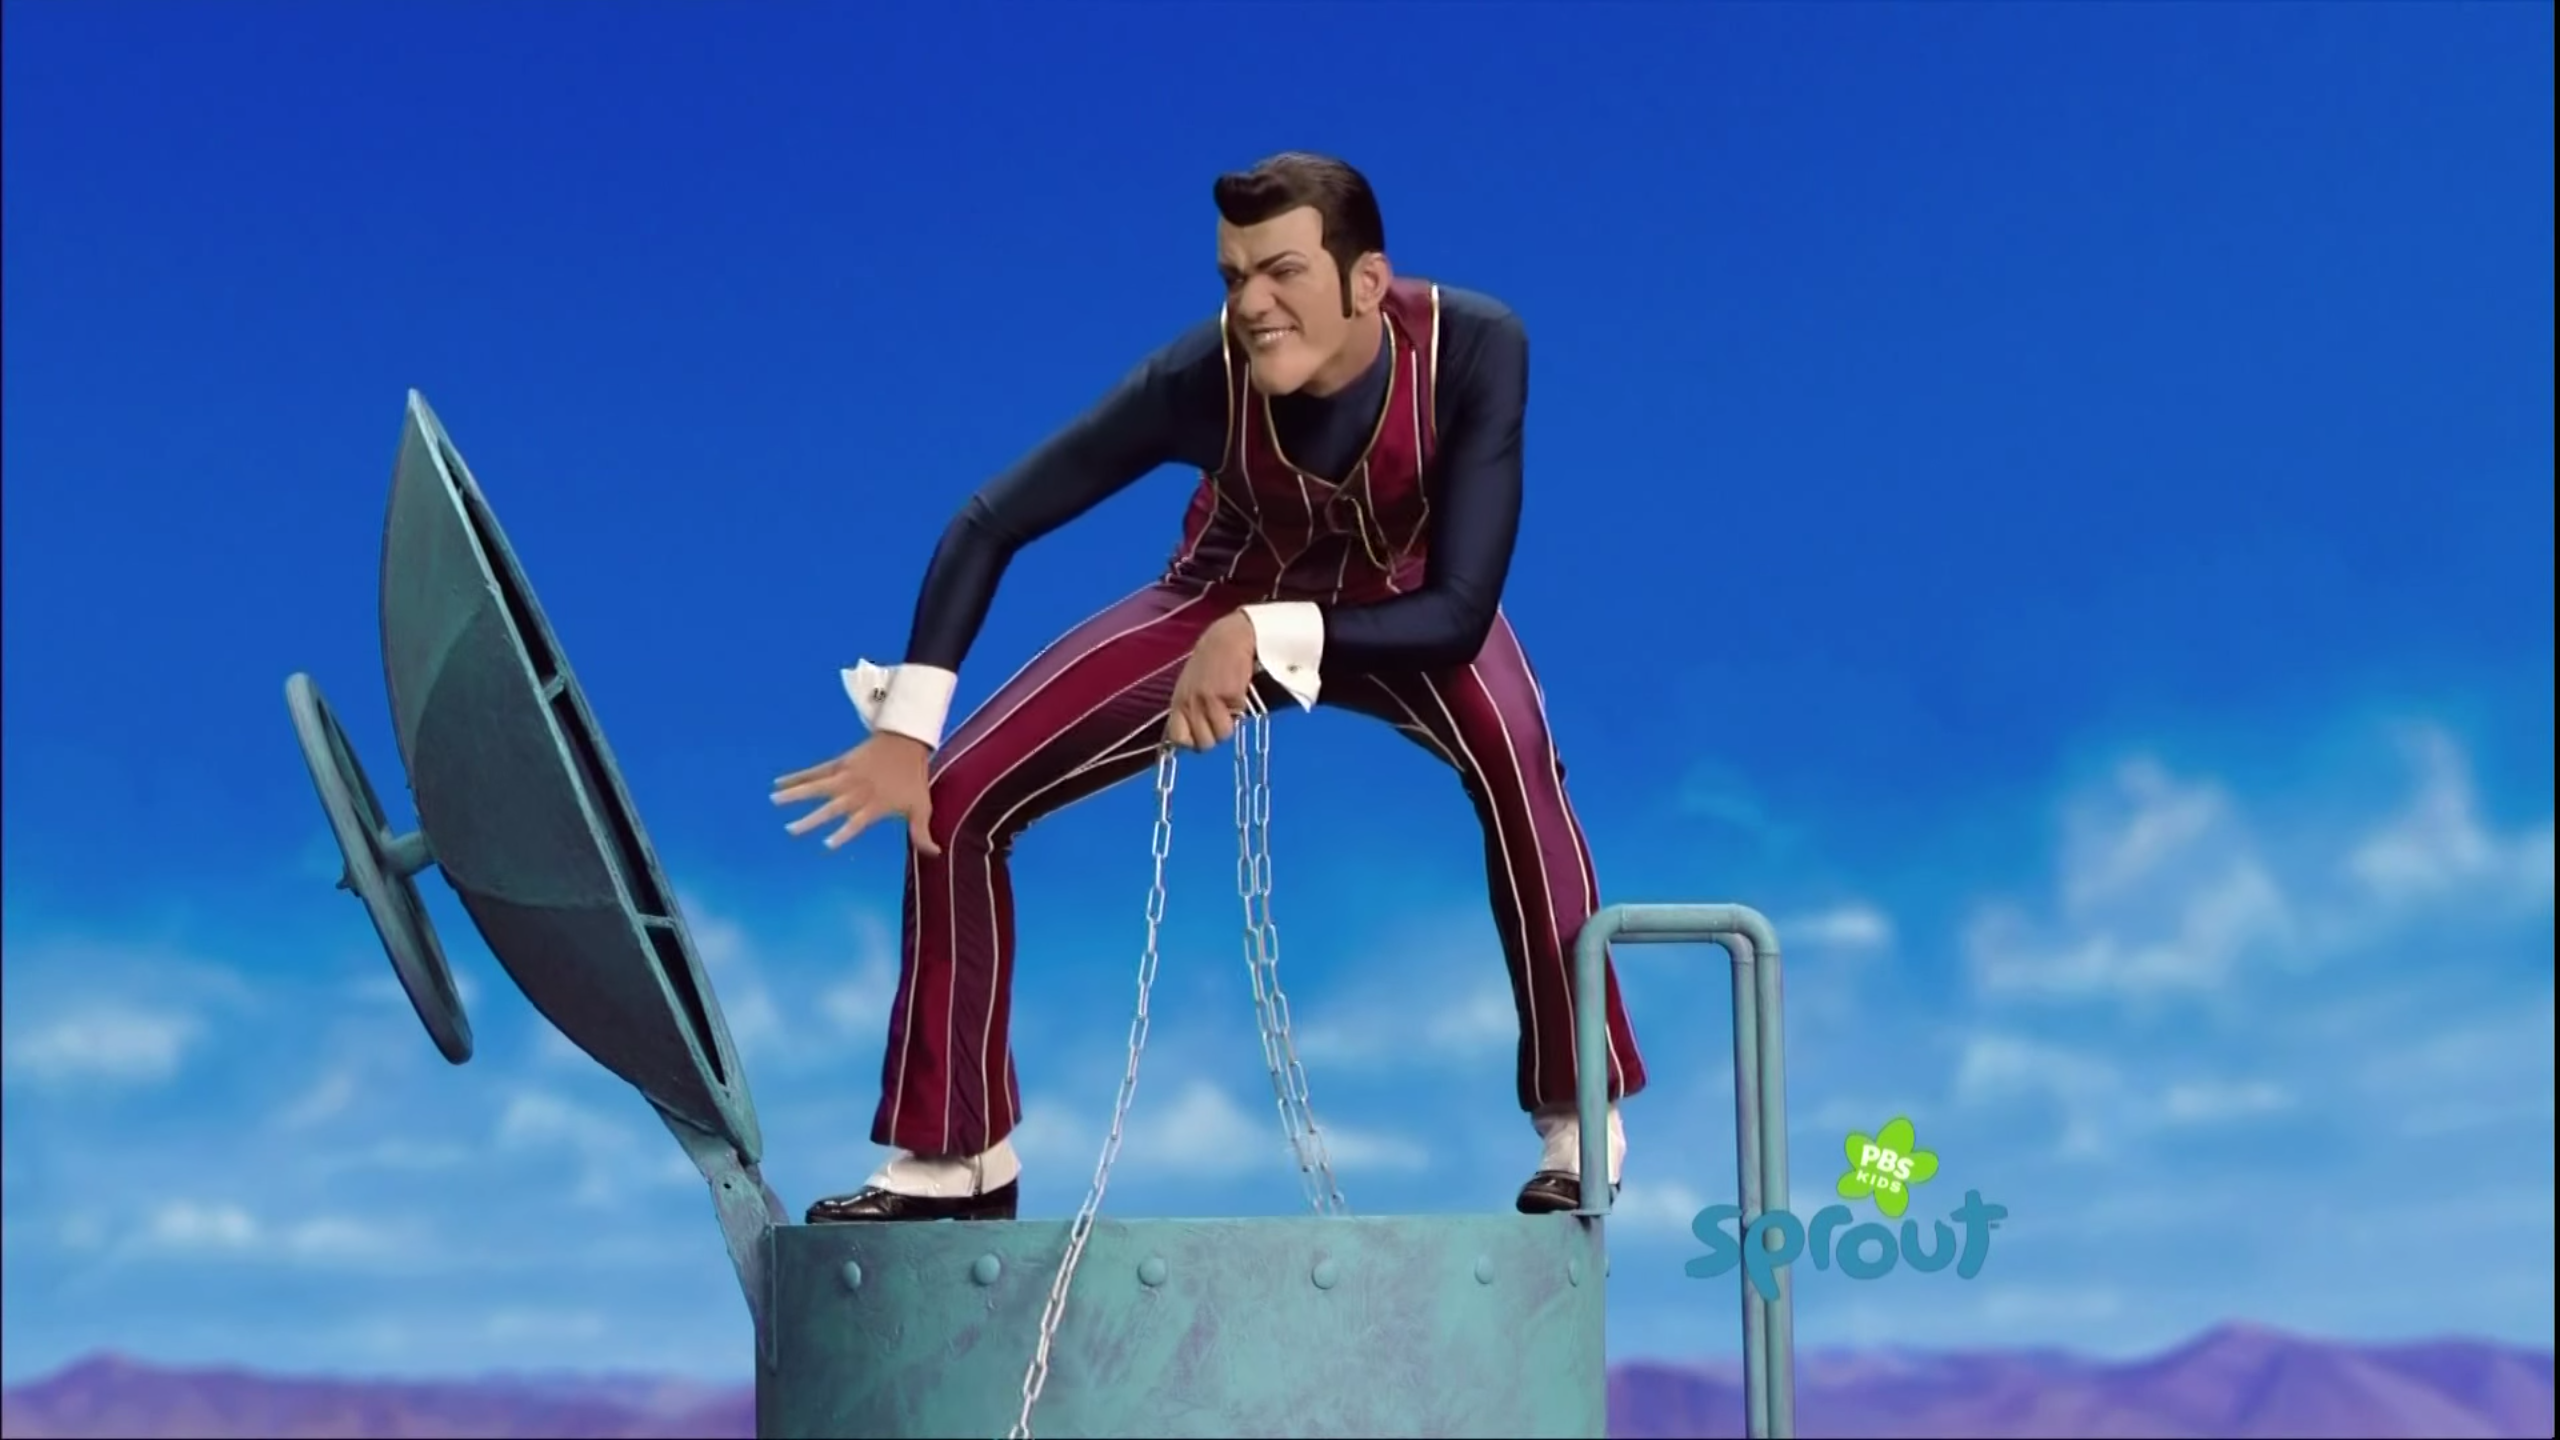 Lazy Town Background